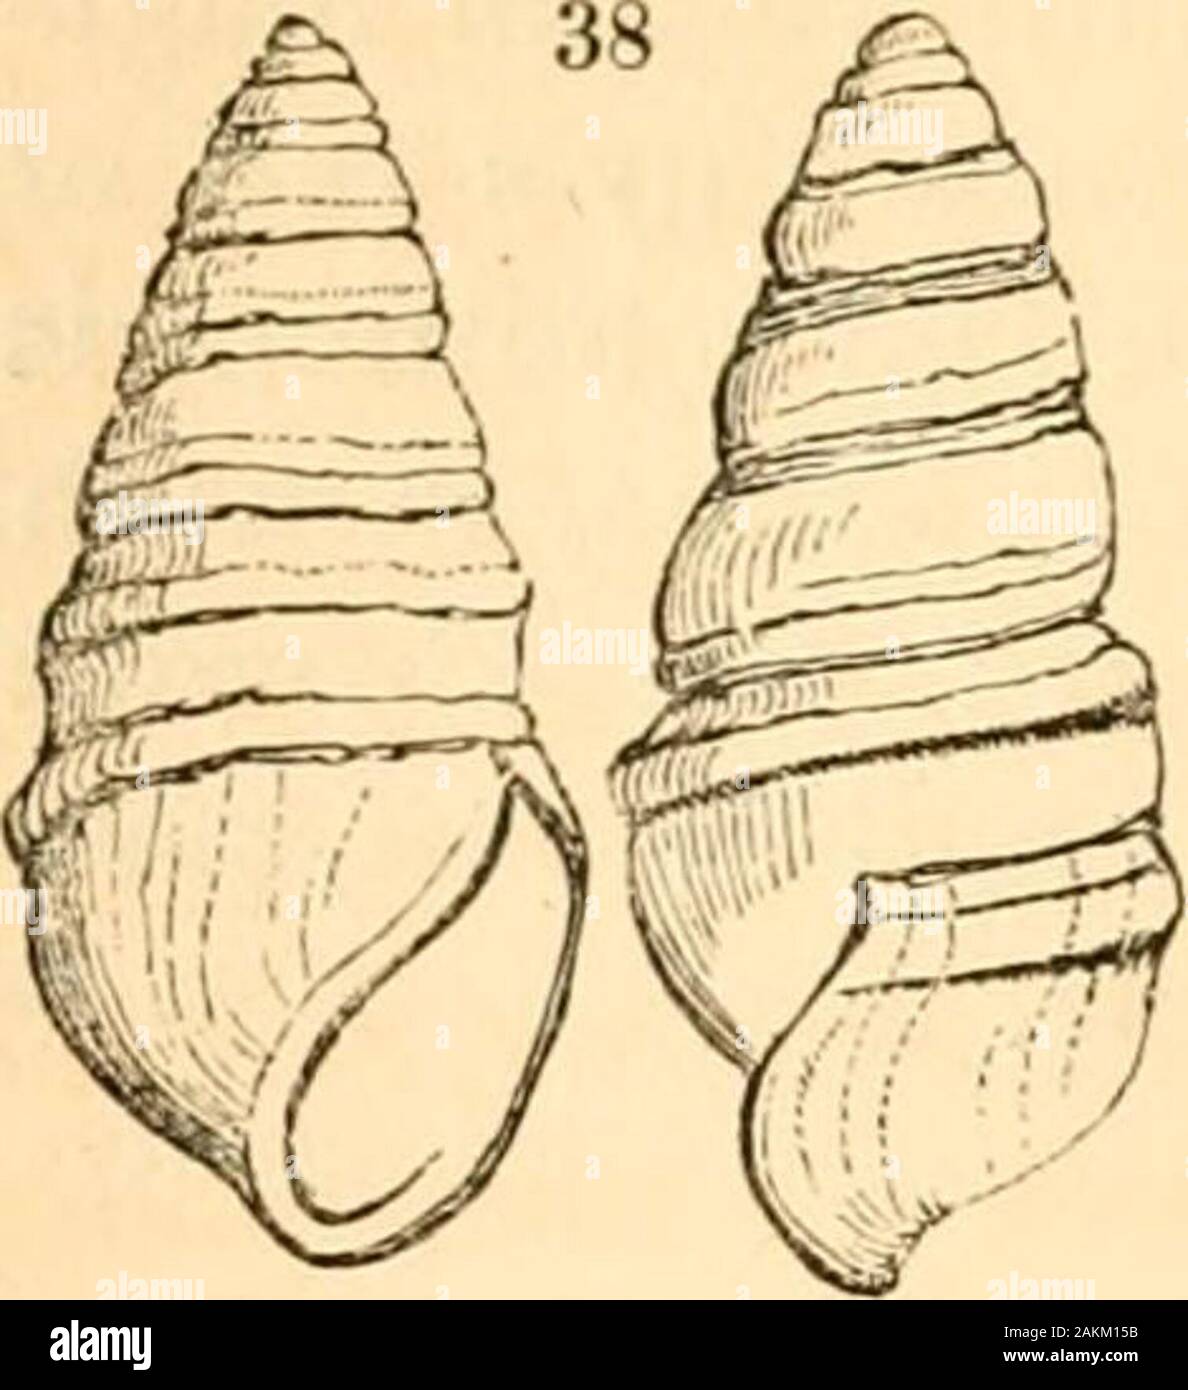 A treatise on malacology; or, Shells and shell fish . ^;- ^]Melanella. Pla.axis. I The use of the last, or additional column, which con-tains the genera of the entire sub-family, is chieflyfor the purpose of showing that Melatoma, while itpreserves its analogy to Pleurotoma, agrees also withPlanaxis in having the base notched, and with Mela-nella by its thickened inner lip. (187.) The next genus is that of Cerithidea. Wehave now come to the cyclostiform type, which, withthe elongate form of Scalaria, has an effuse and circularaperture, with the outer lip dilated into a broad fringe,and a very Stock Photo